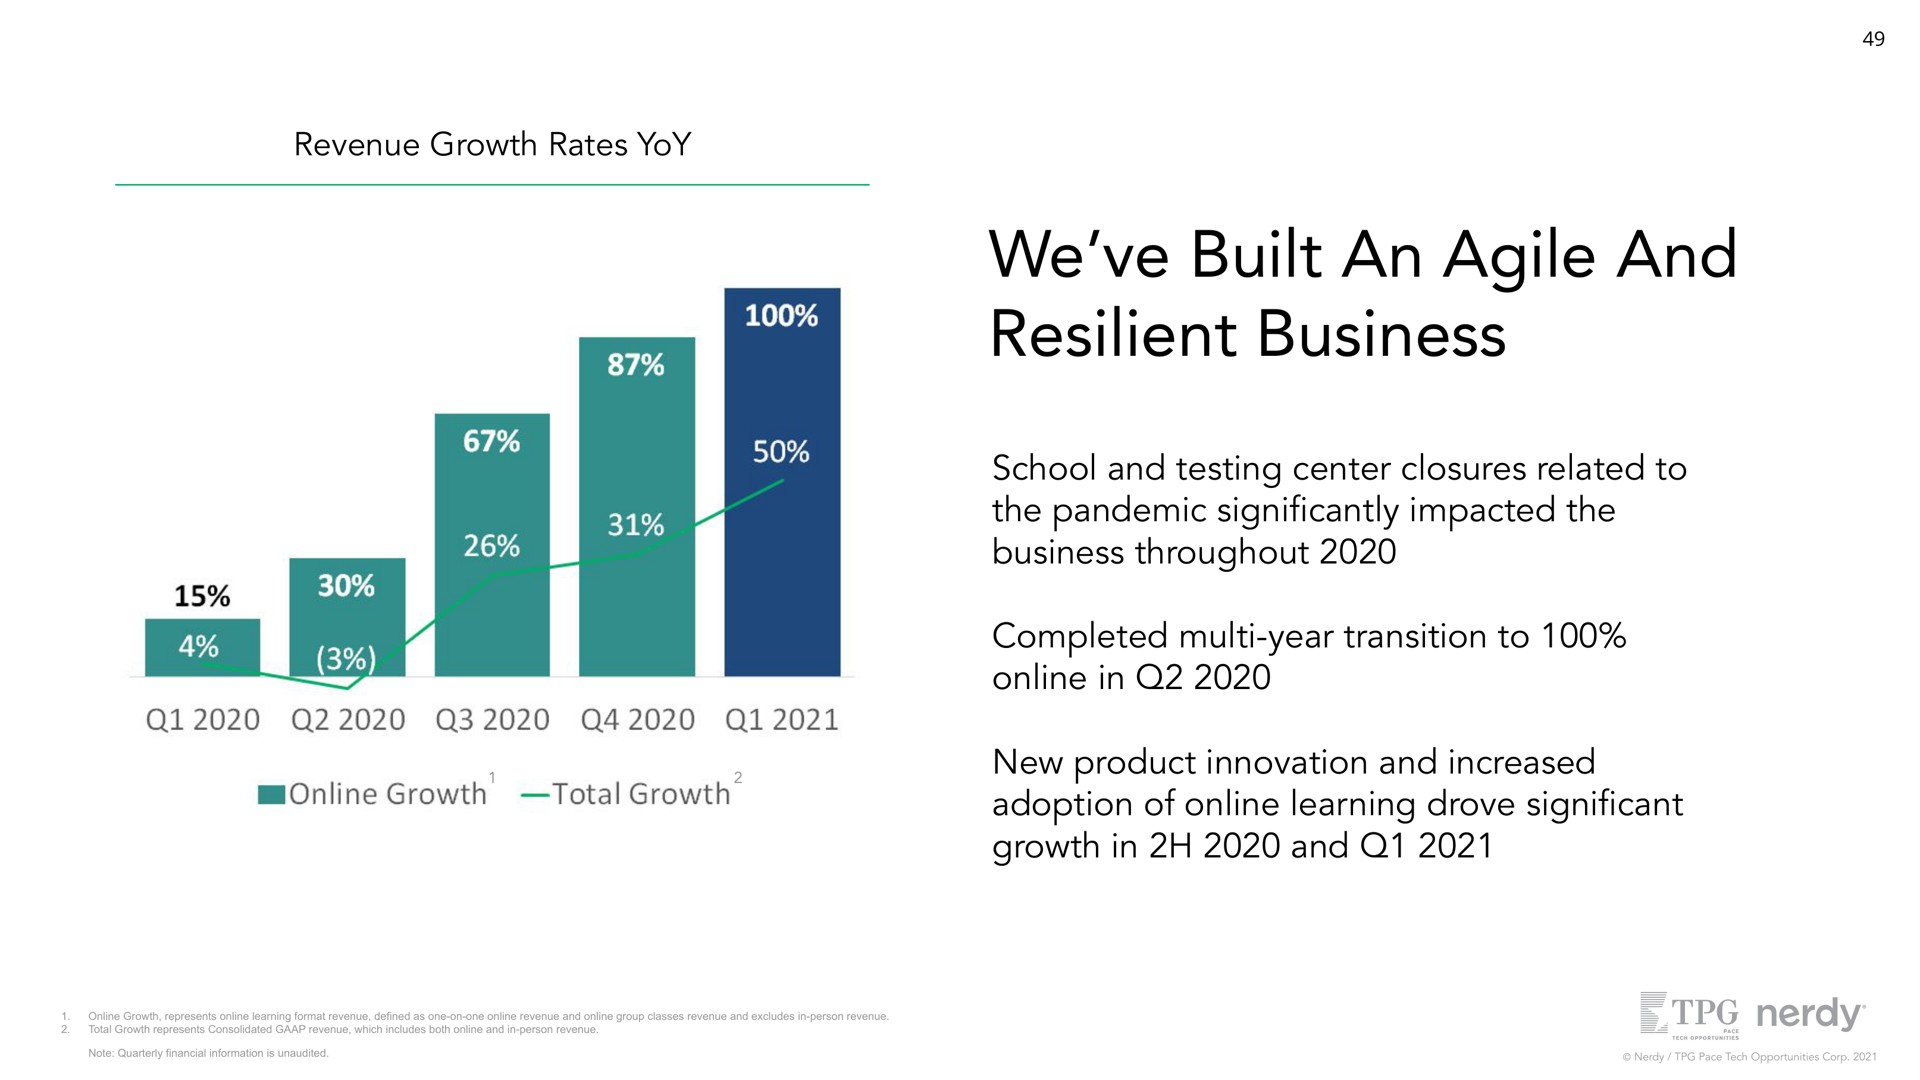 revenue growth rates yoy we built an agile and resilient business school and testing center closures related to the pandemic impacted the business throughout completed year transition to in new product innovation and increased adoption of learning drove cant growth in and | Nerdy